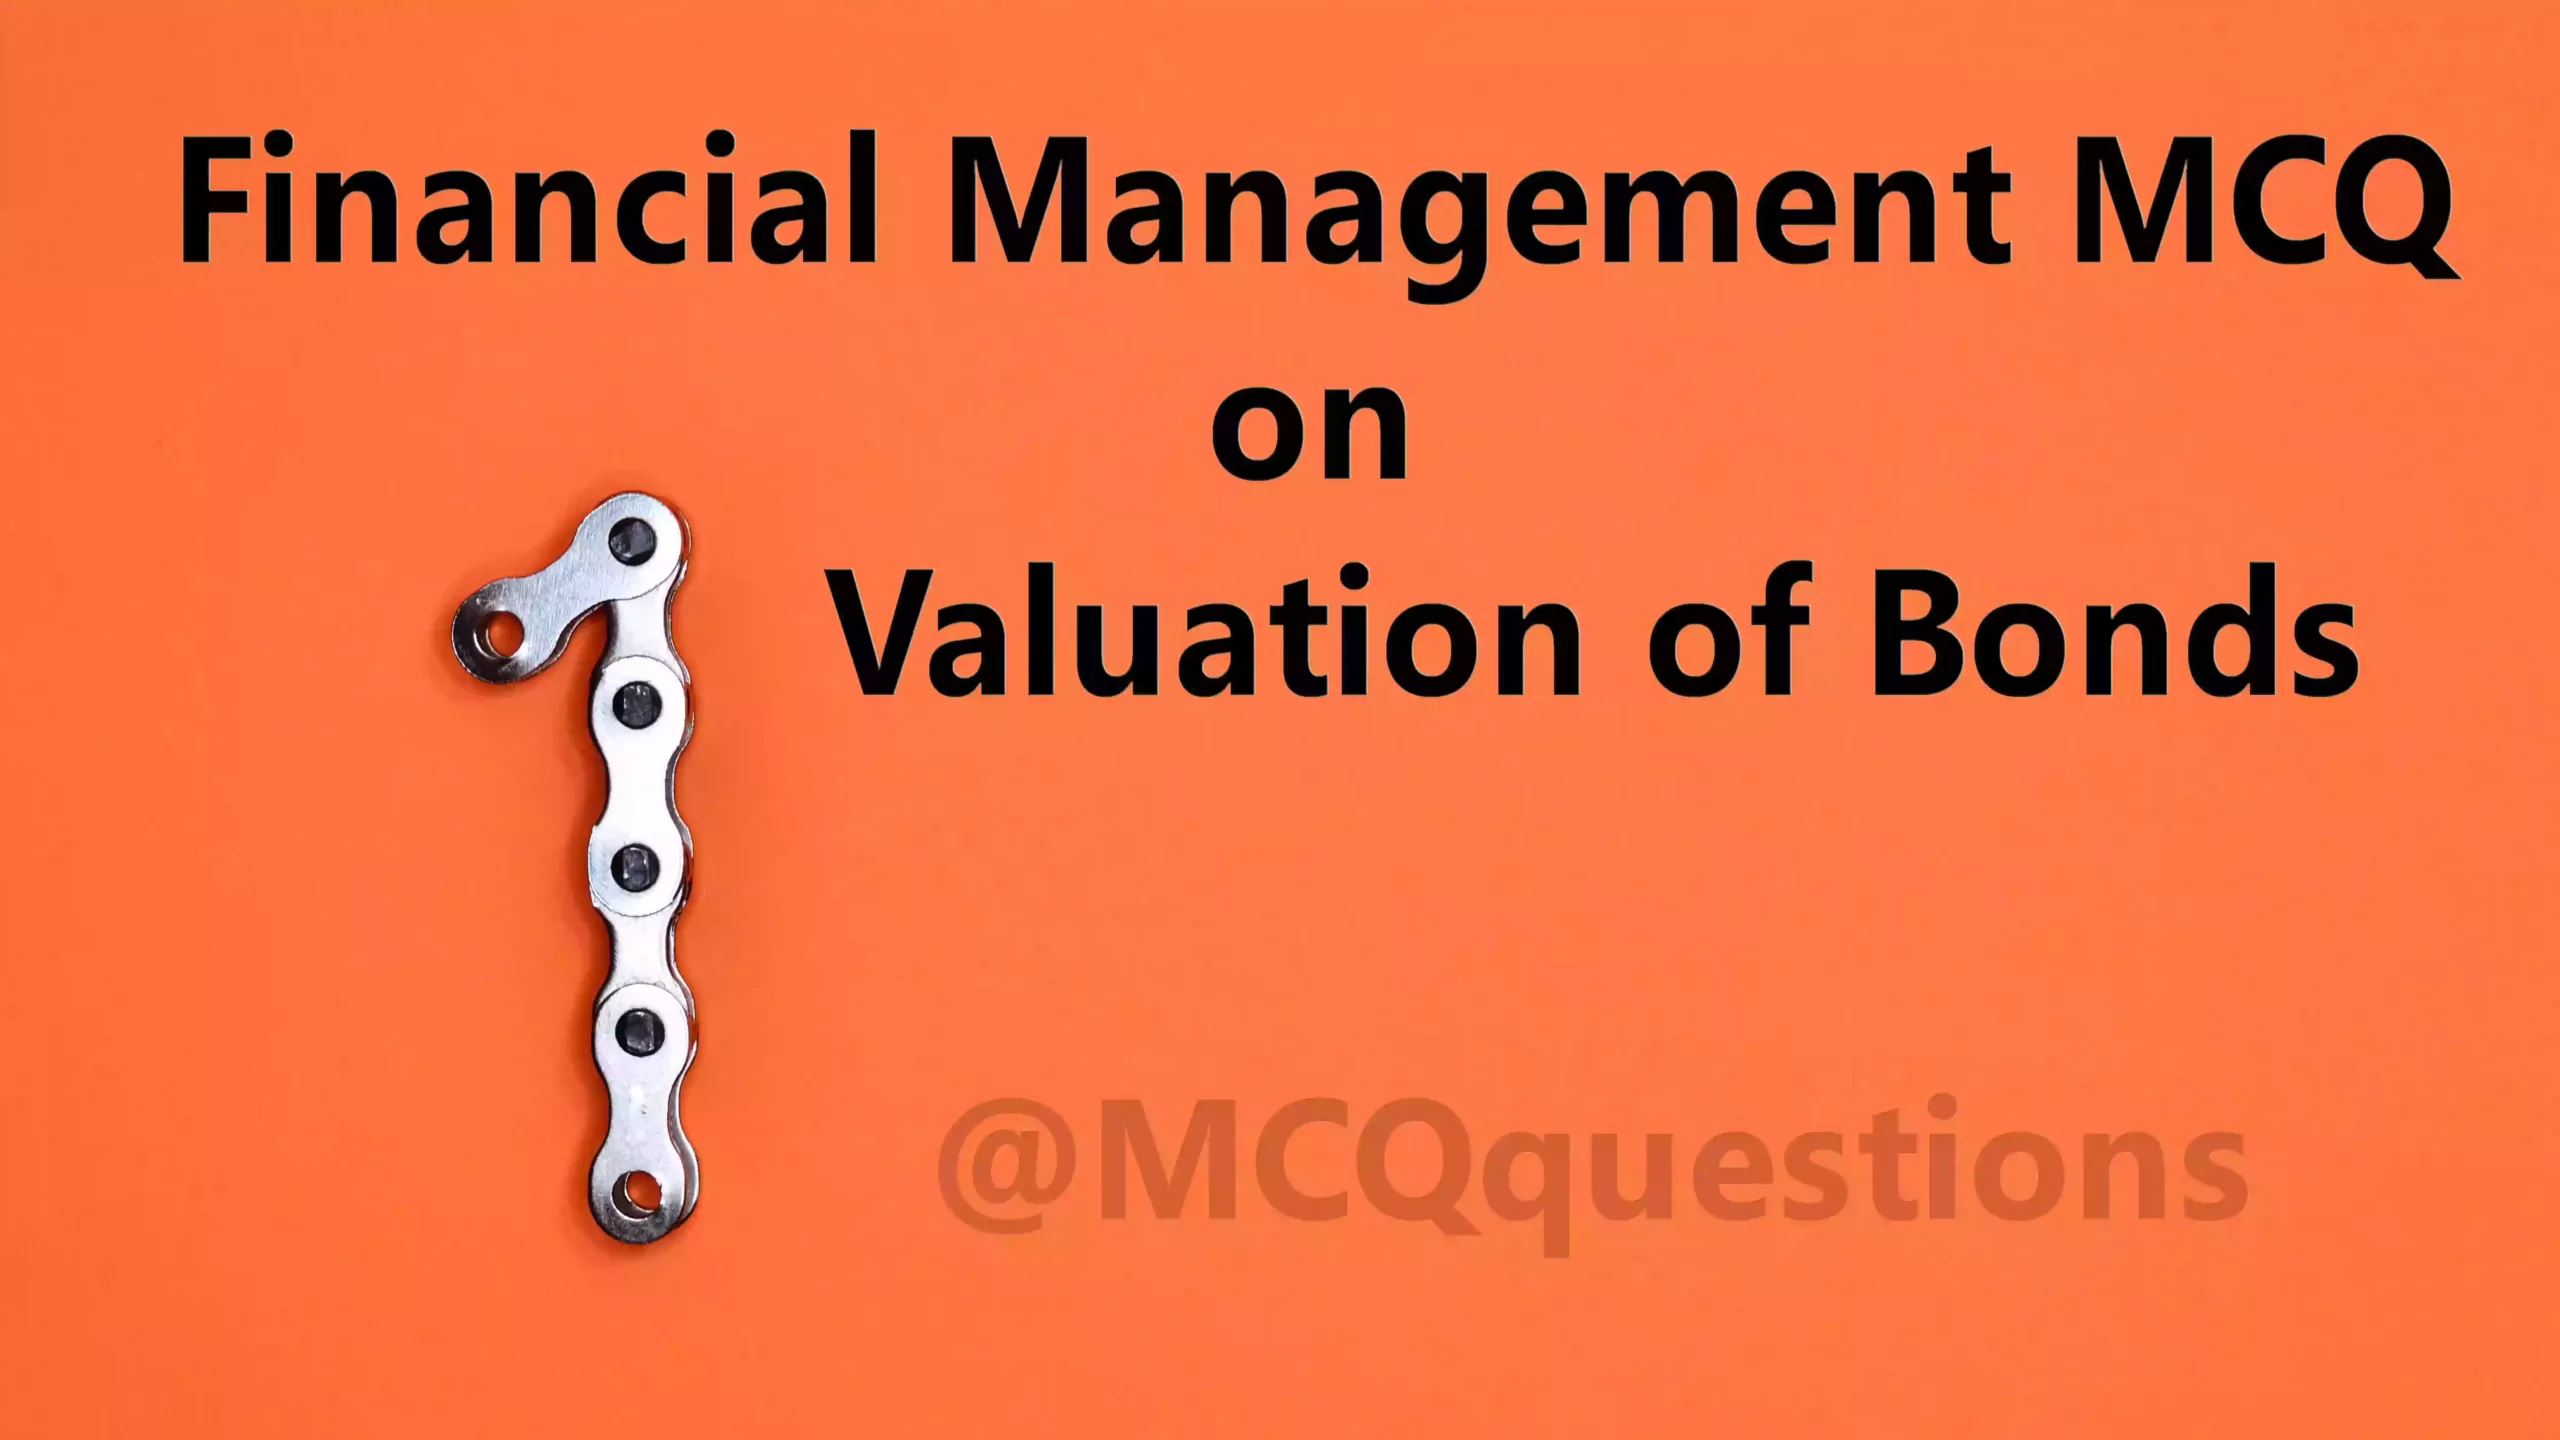 Financial Management MCQ on Valuation of Bonds